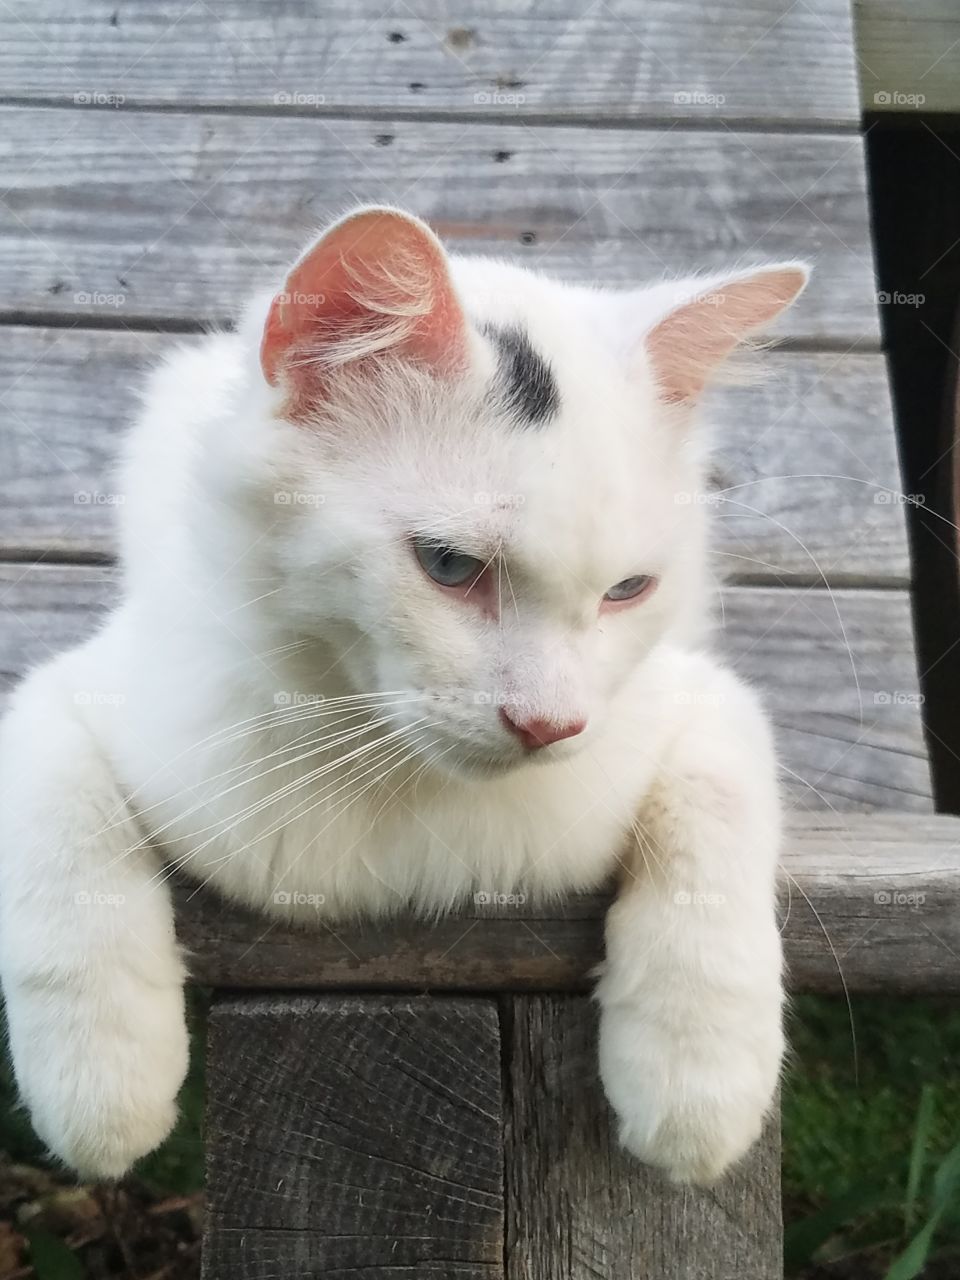 my cat snow just hanging out.